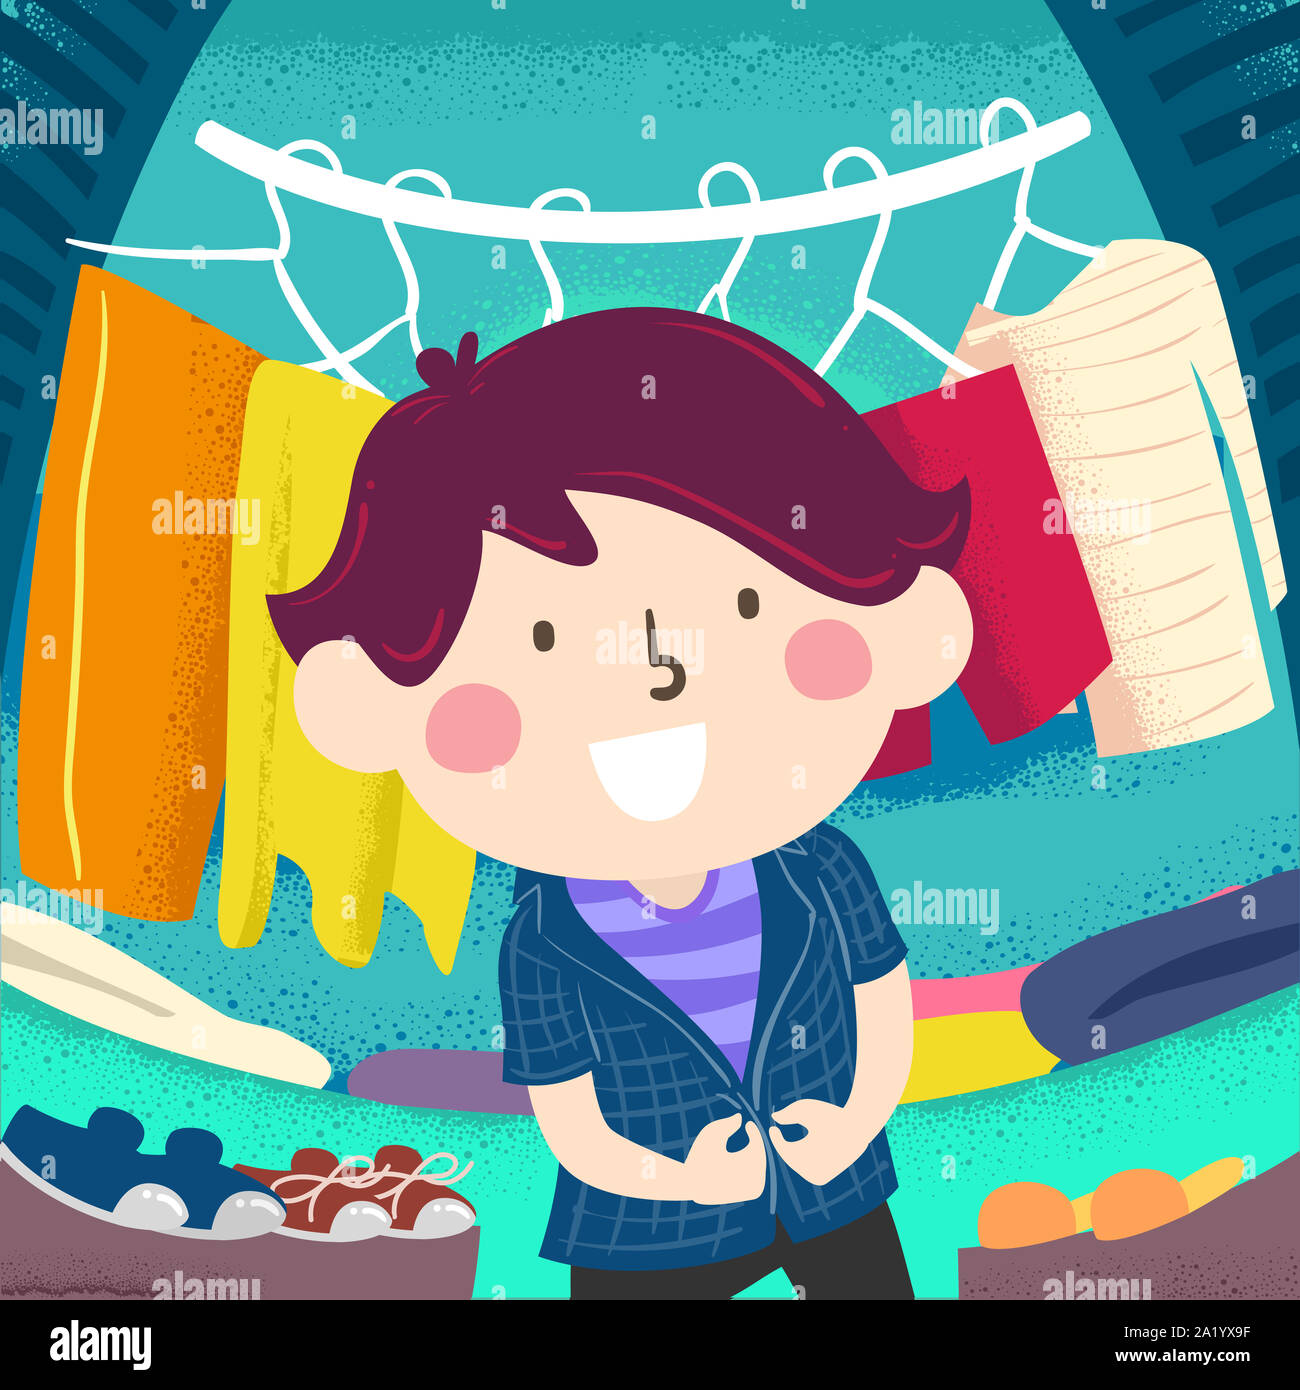 Illustration of a Kid Boy Looking for Appropriate Clothing for the Day from Inside His Closet Stock Photo